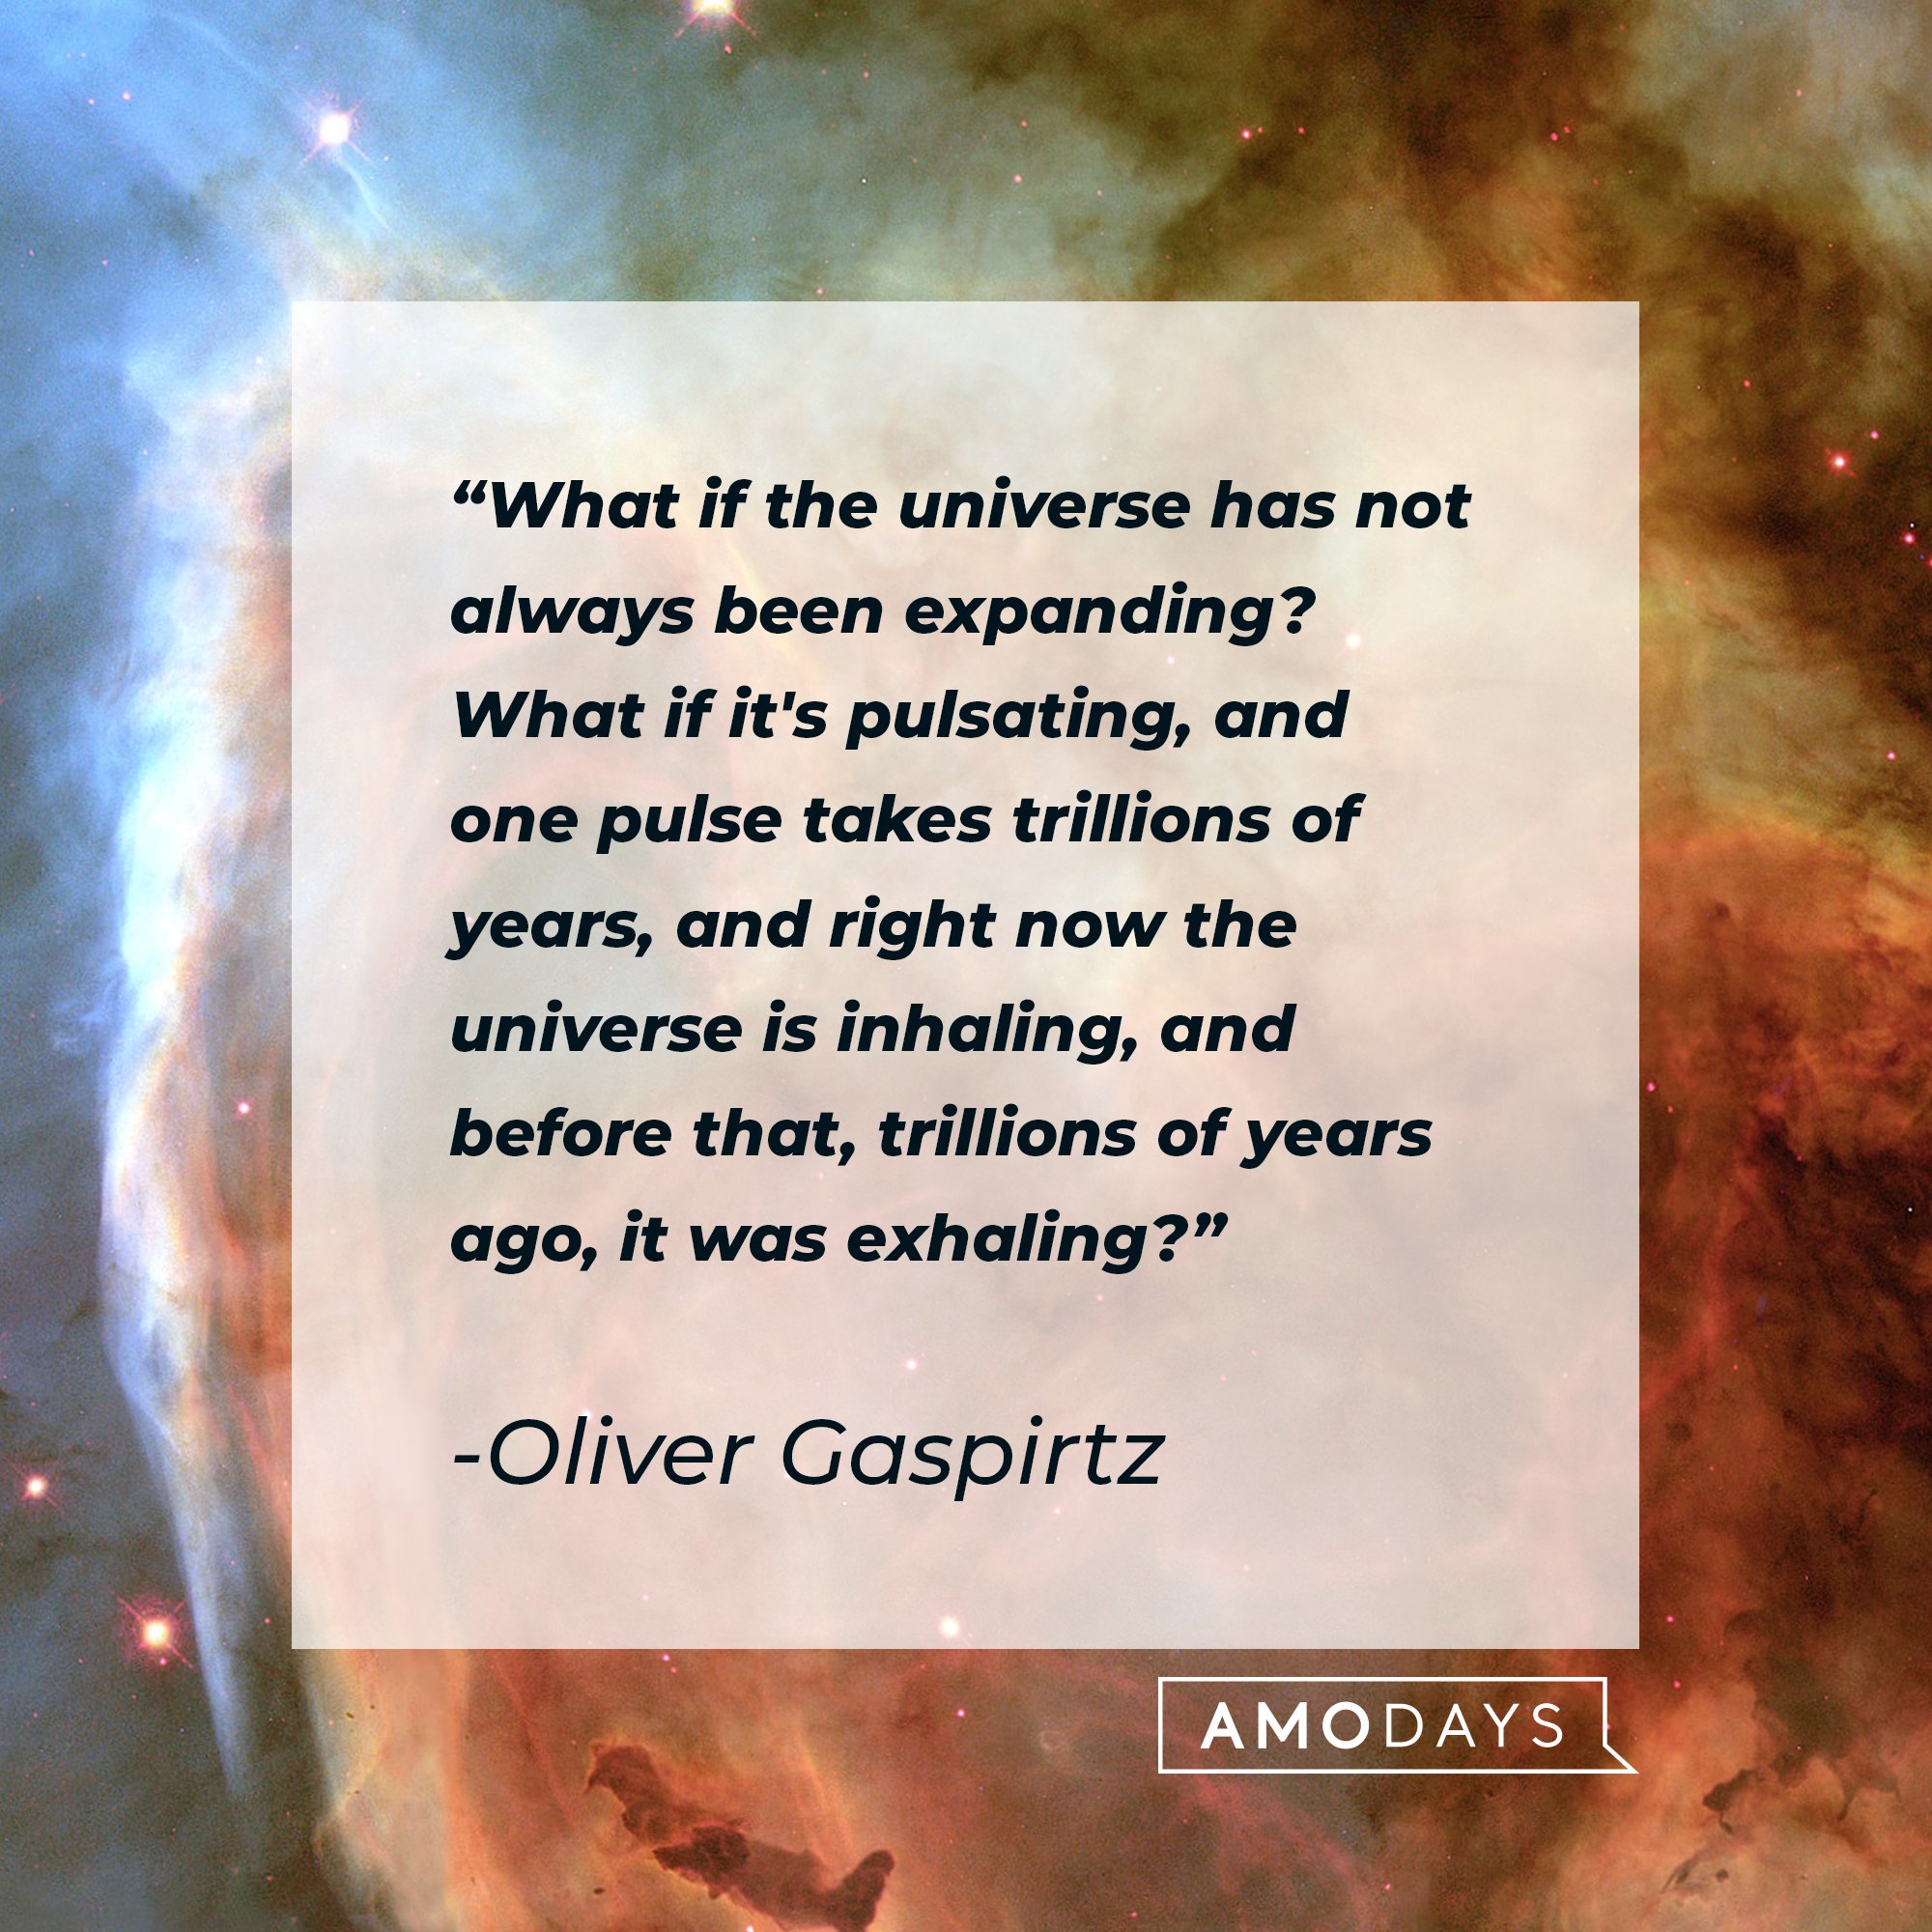 Oliver Gaspirtz’s quote: "What if the universe has not always been expanding? What if it's pulsating, and one pulse takes trillions of years, and right now the universe is inhaling, and before that, trillions of years ago, it was exhaling?" | Image: AmoDays